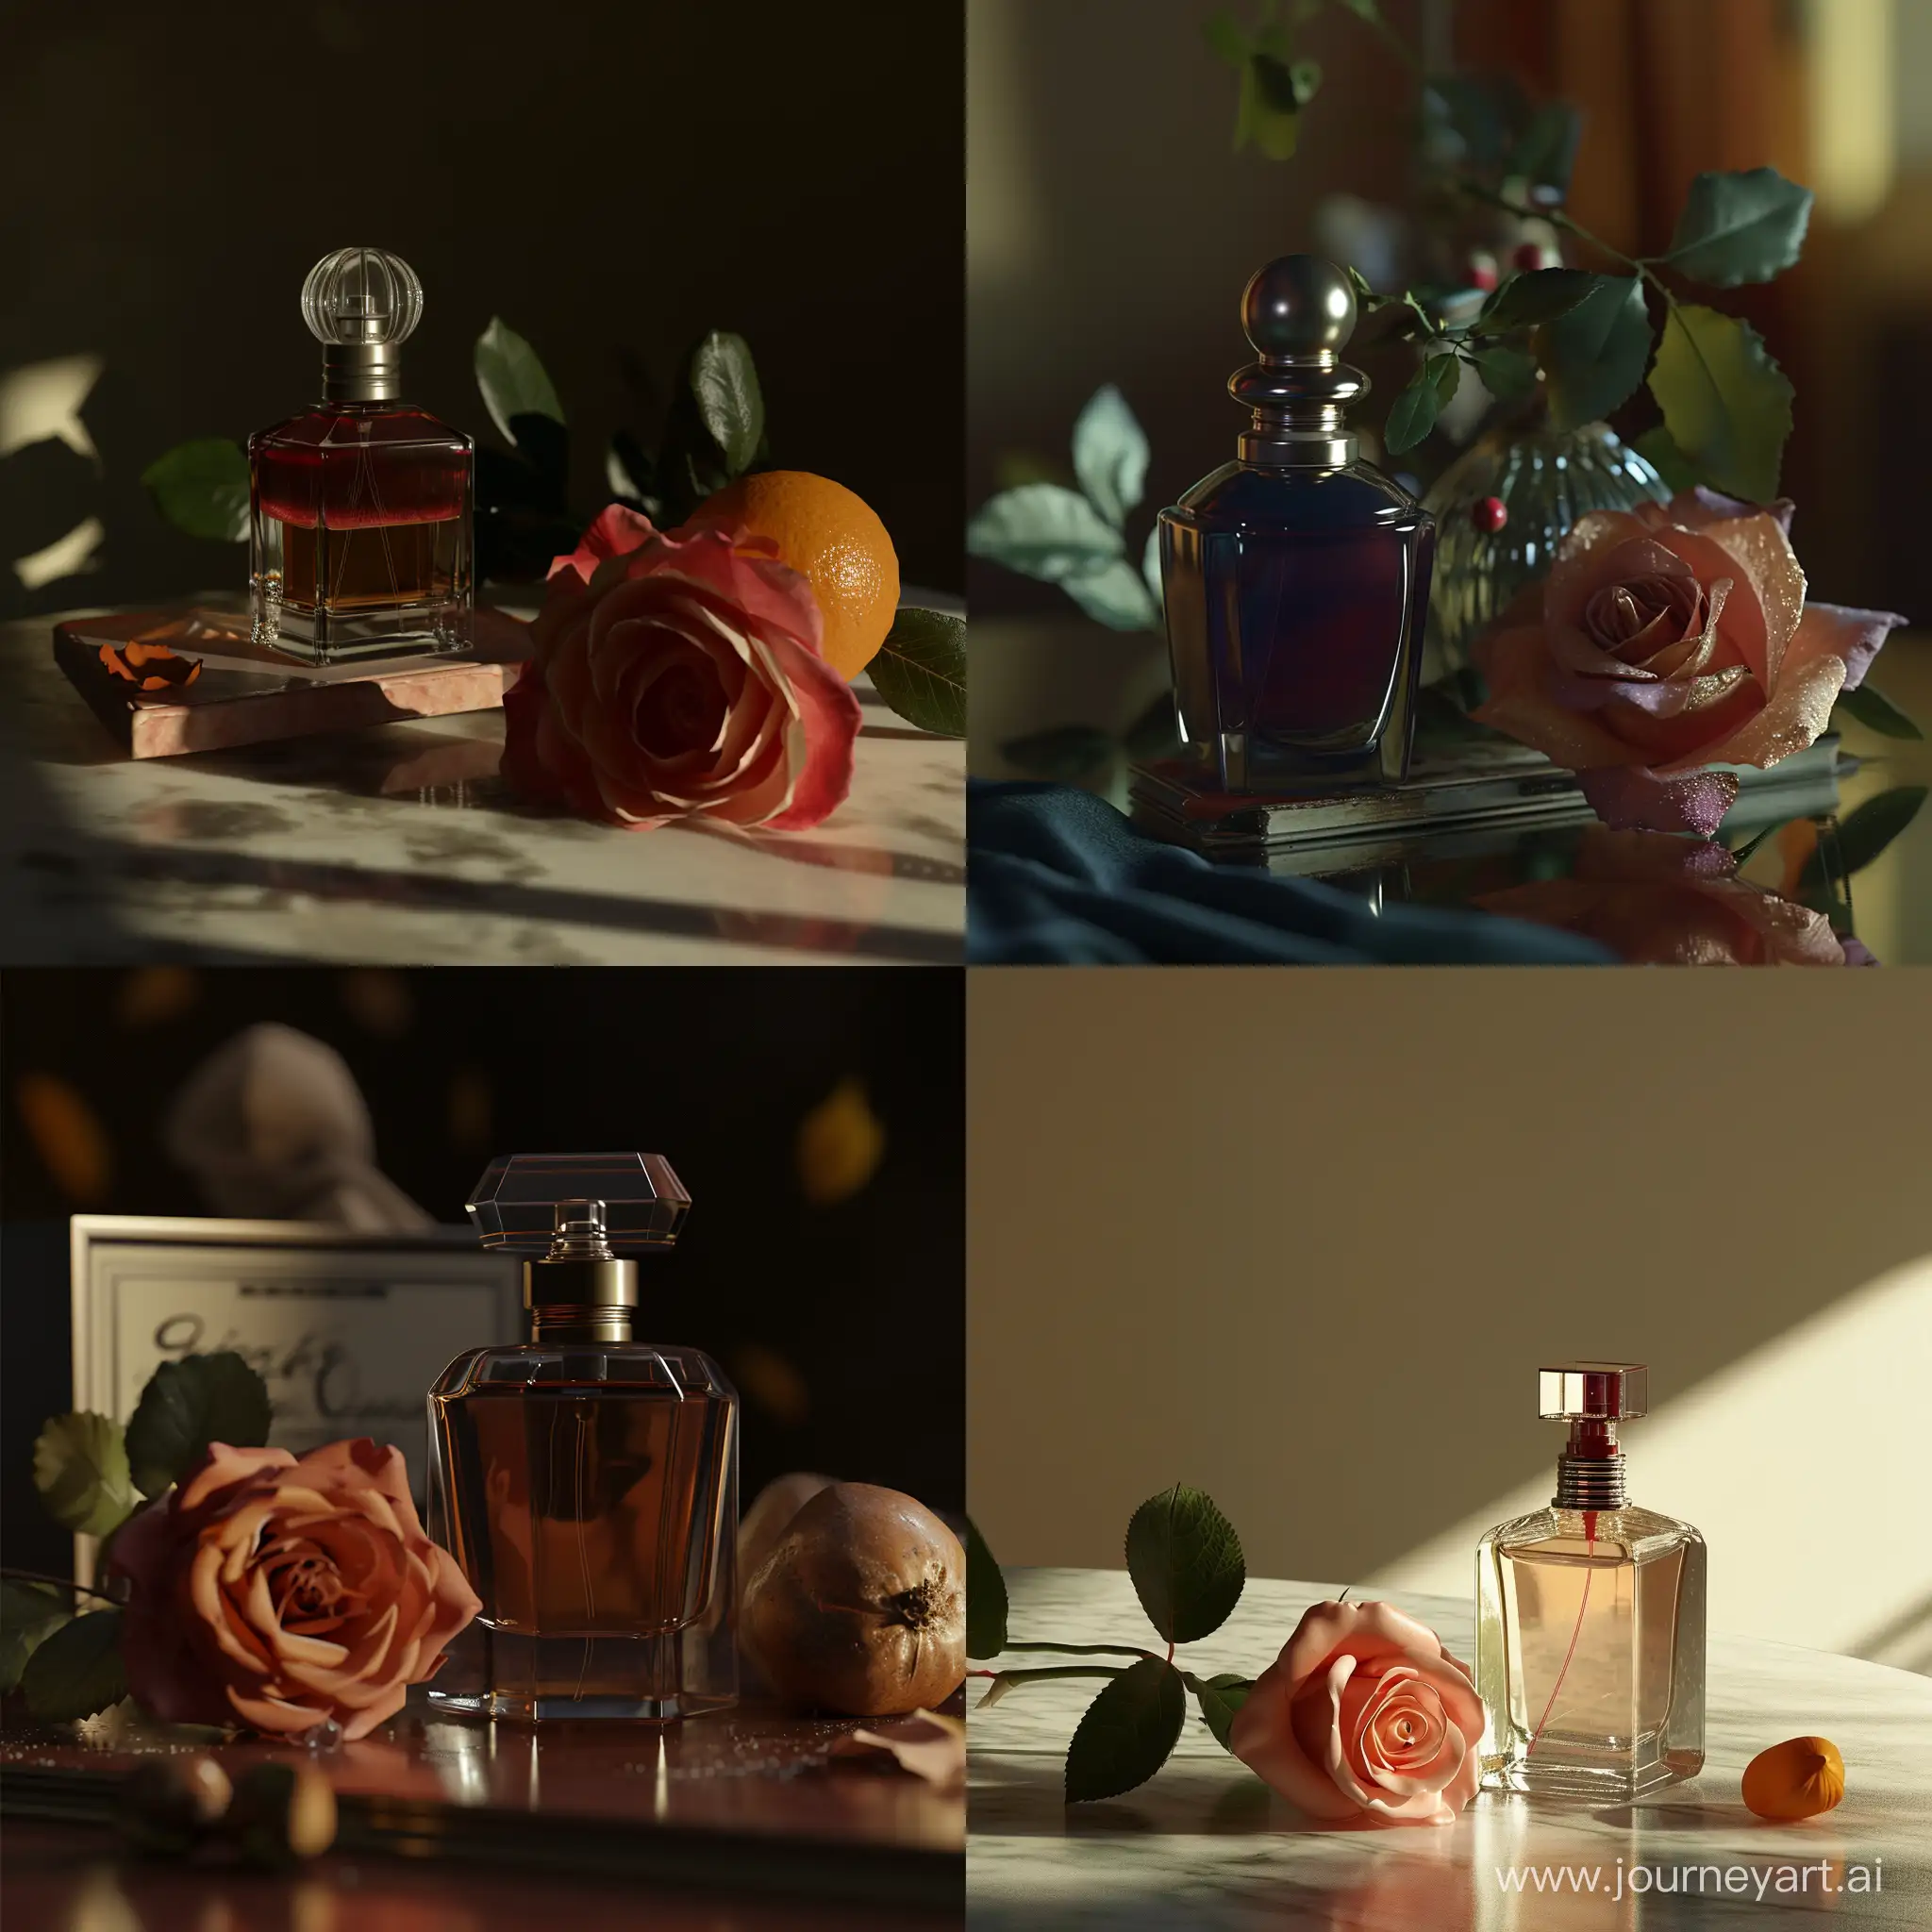 there is a bottle of perfume and a rose on a table, octain render, letterism, dark lipstick, ori, ochre, packaging, low res, an epic non - binary model, dof, inspired by Louis Hersent, is a stunning, dark lips, lamented, glamor shot, the orb of dreams, dictatorship